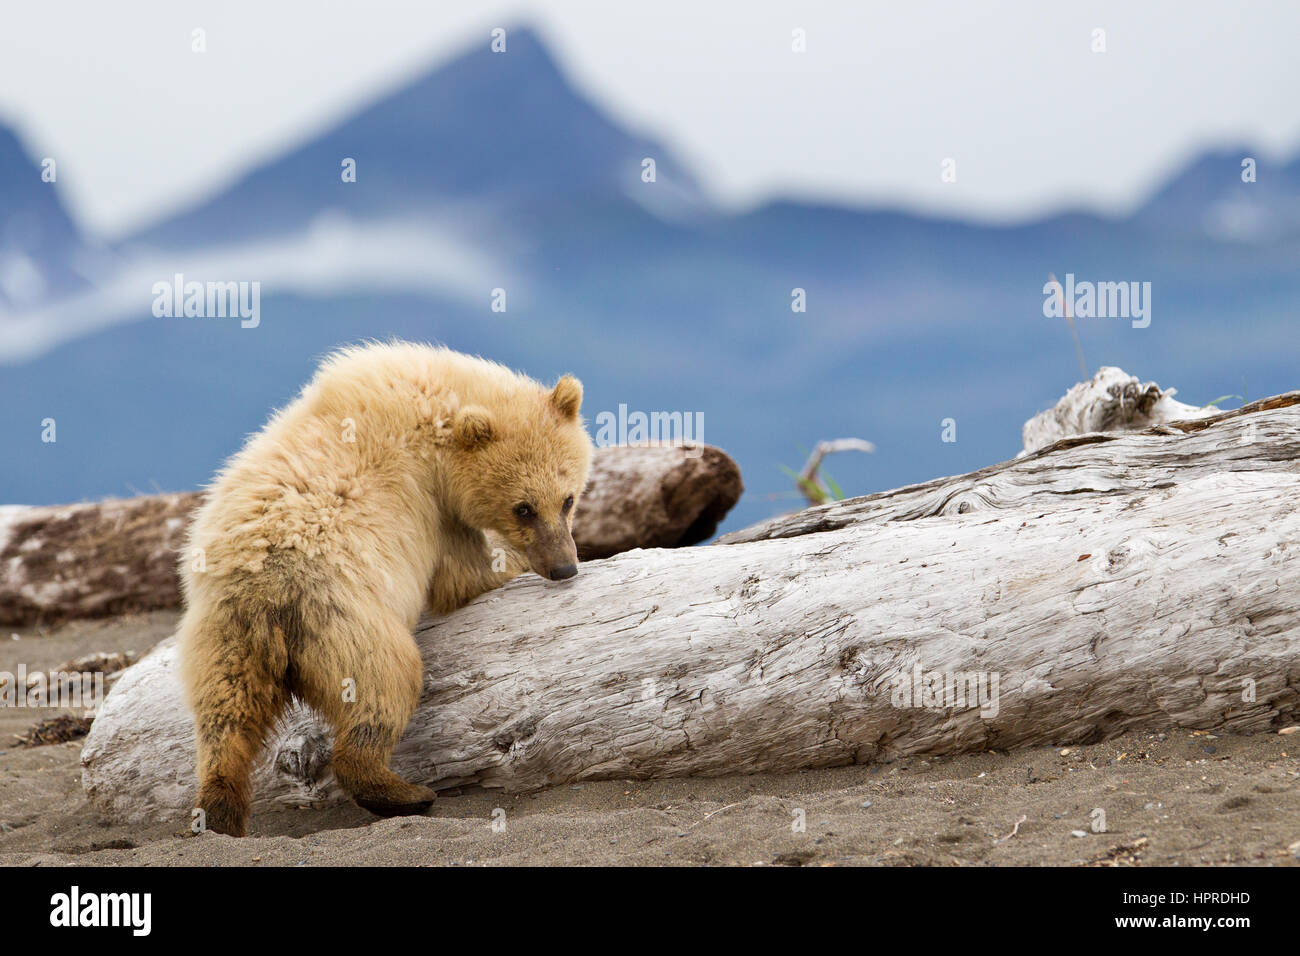 A young brown bear cub is curious about tourists on a bear viewing trip to the beach of Hallo Bay, Katmai National Park, Alaska, United States. Stock Photo